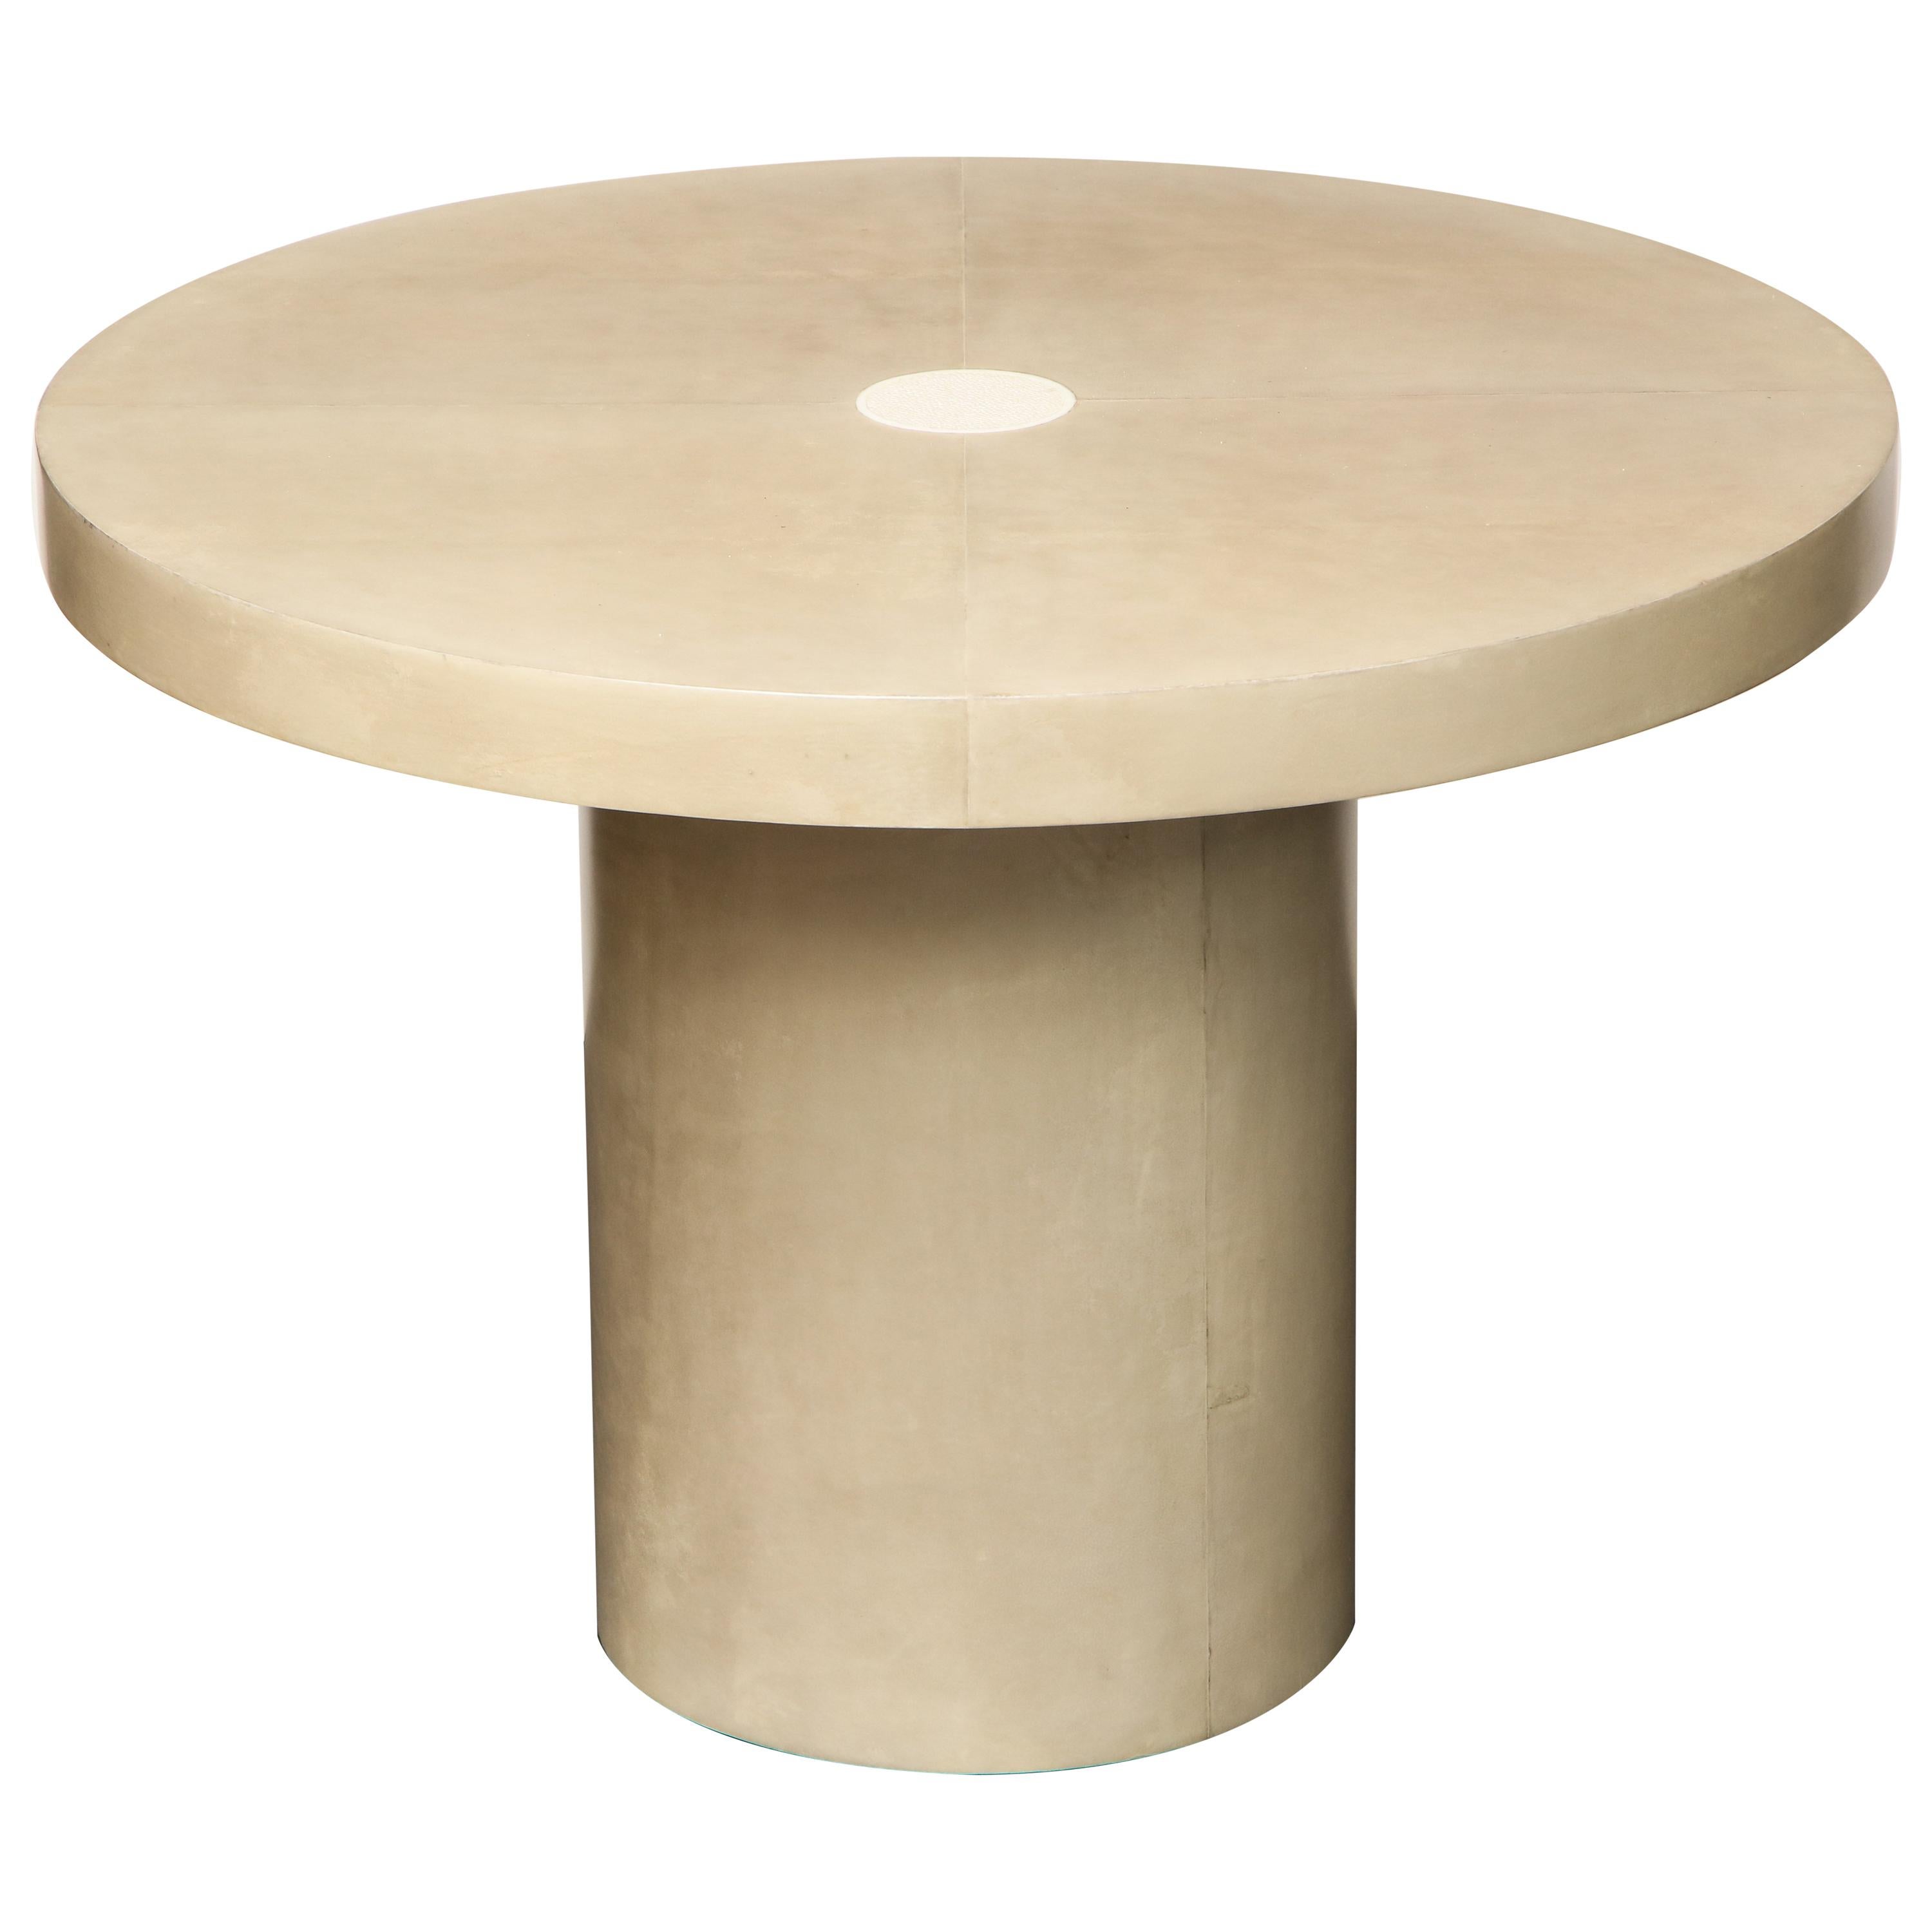 Round Parchment Table with Genuine Shagreen and Bone Trim